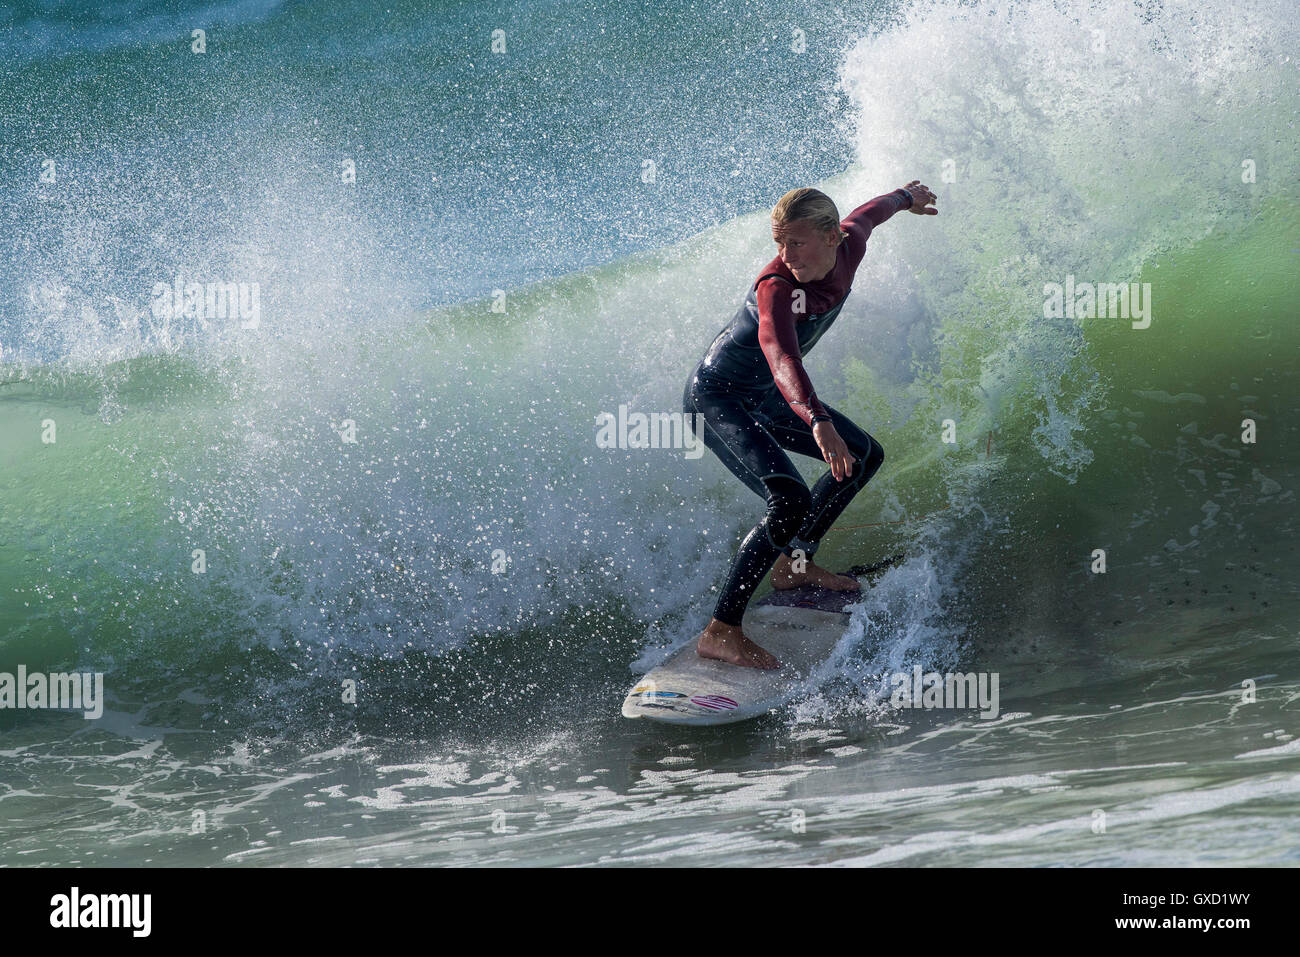 A surfer in spectacular action at Fistral in Newquay, Cornwall, England. Stock Photo